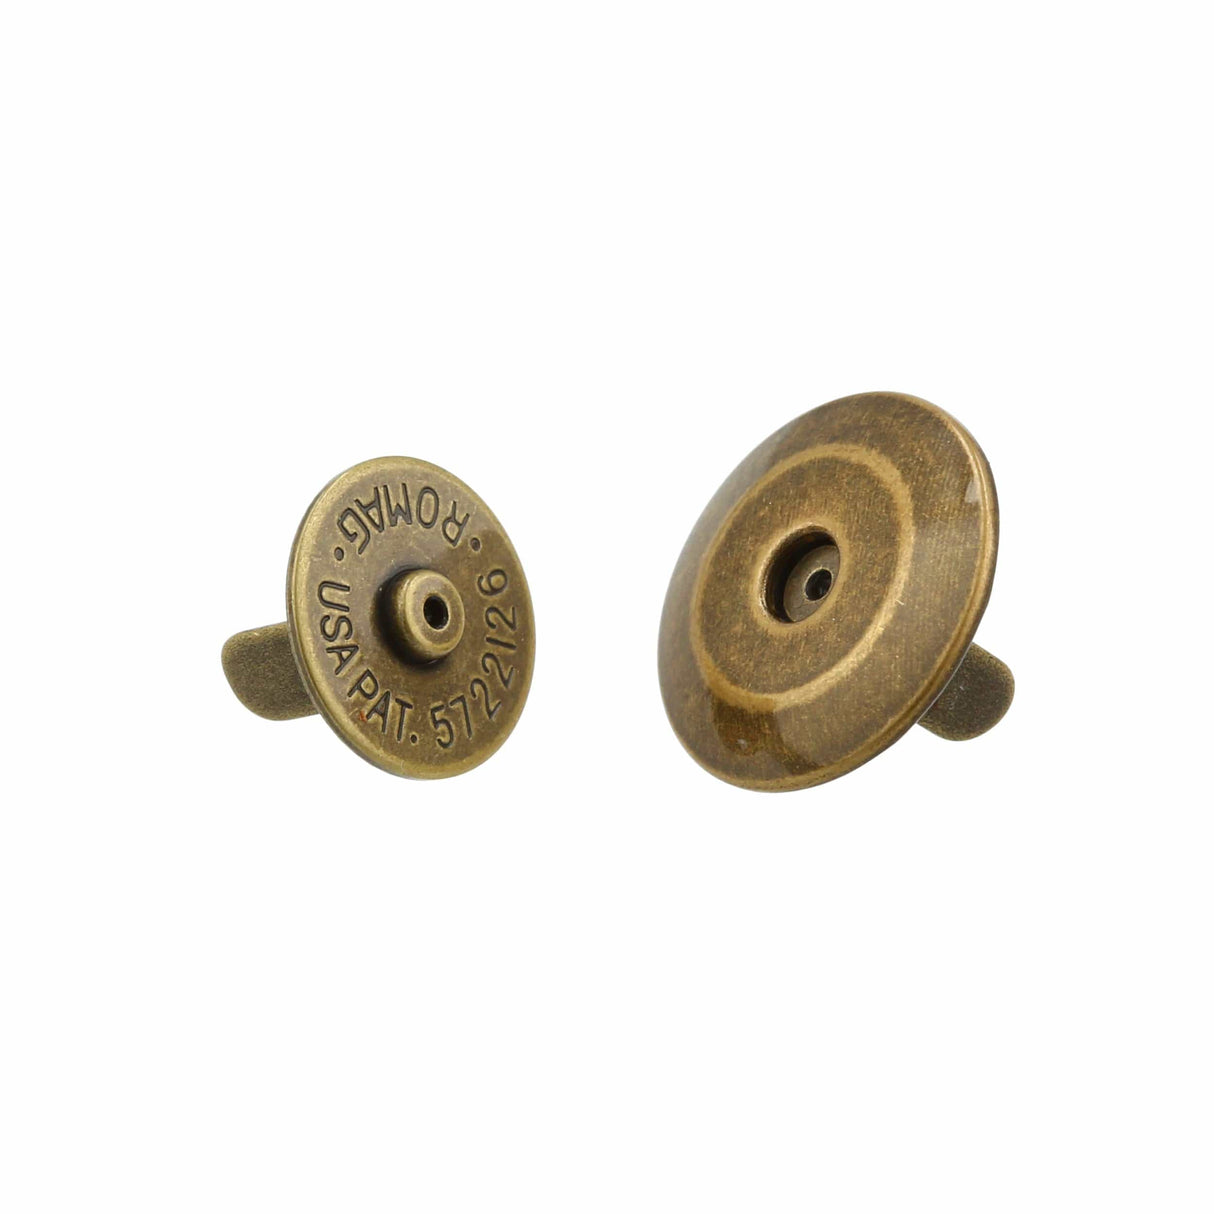 Brass Fasteners Manufacturers and Suppliers in the USA